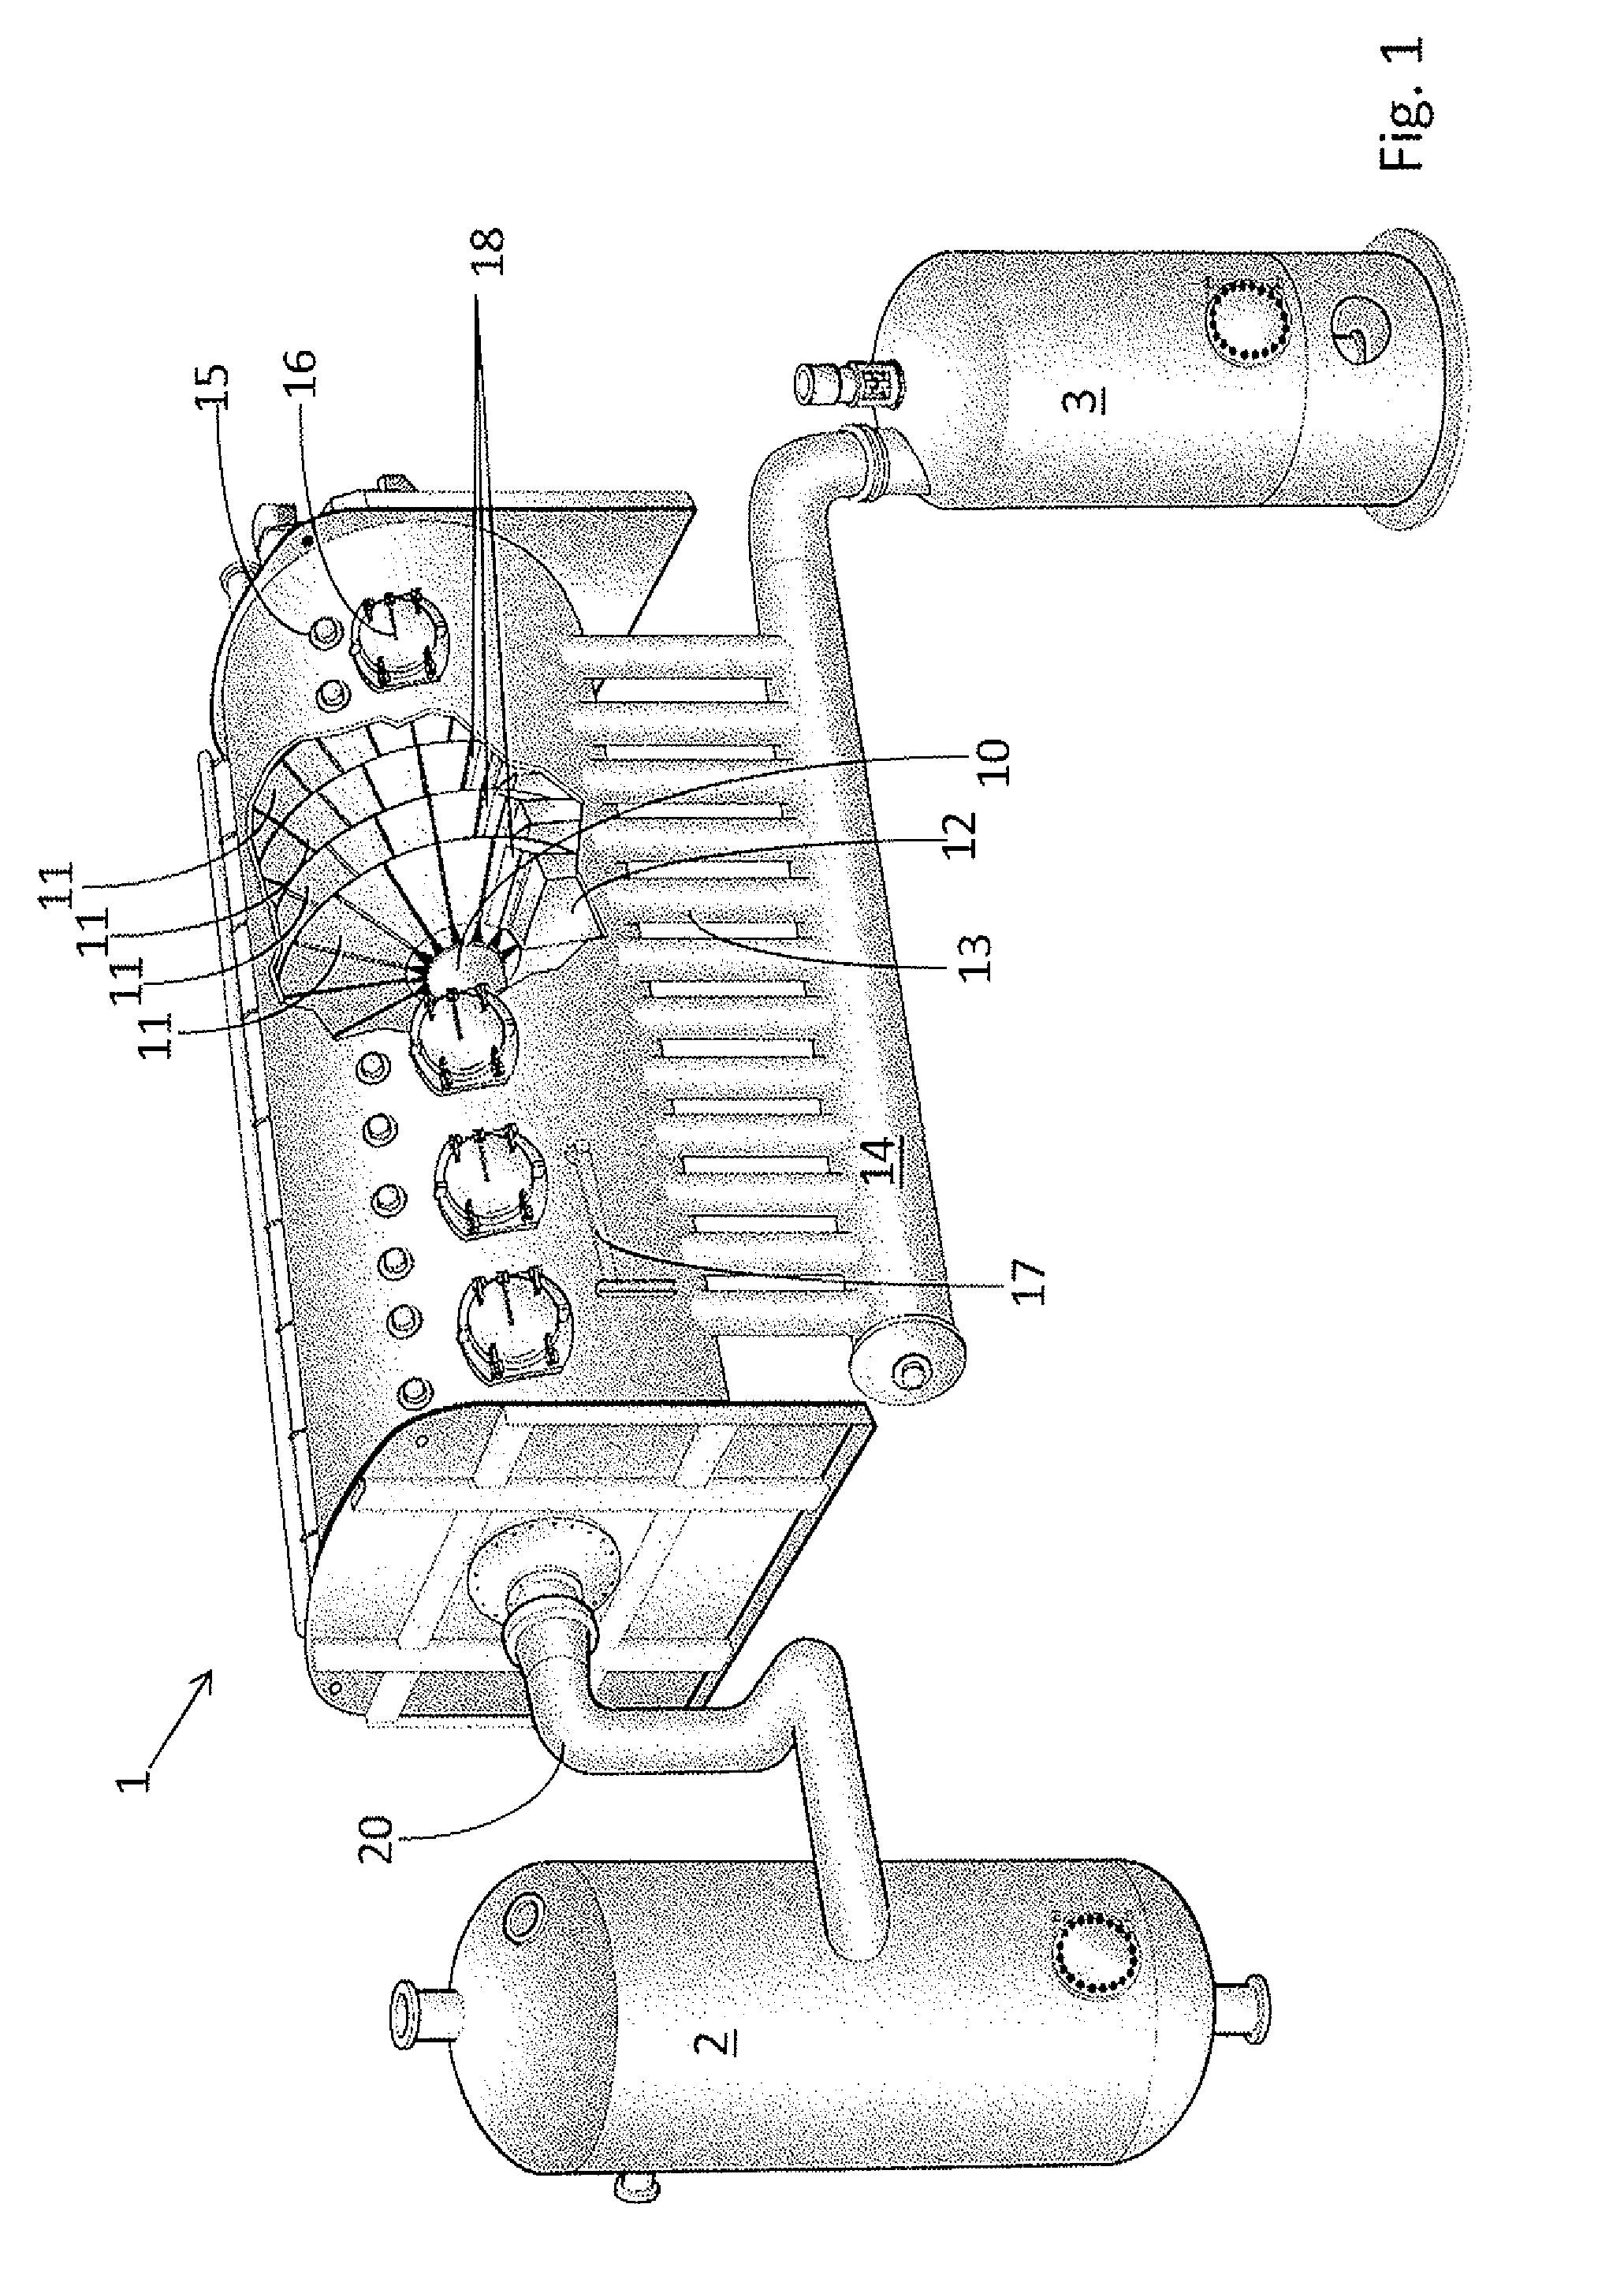 Method and equipment for measuring the filter sectors in disc filters